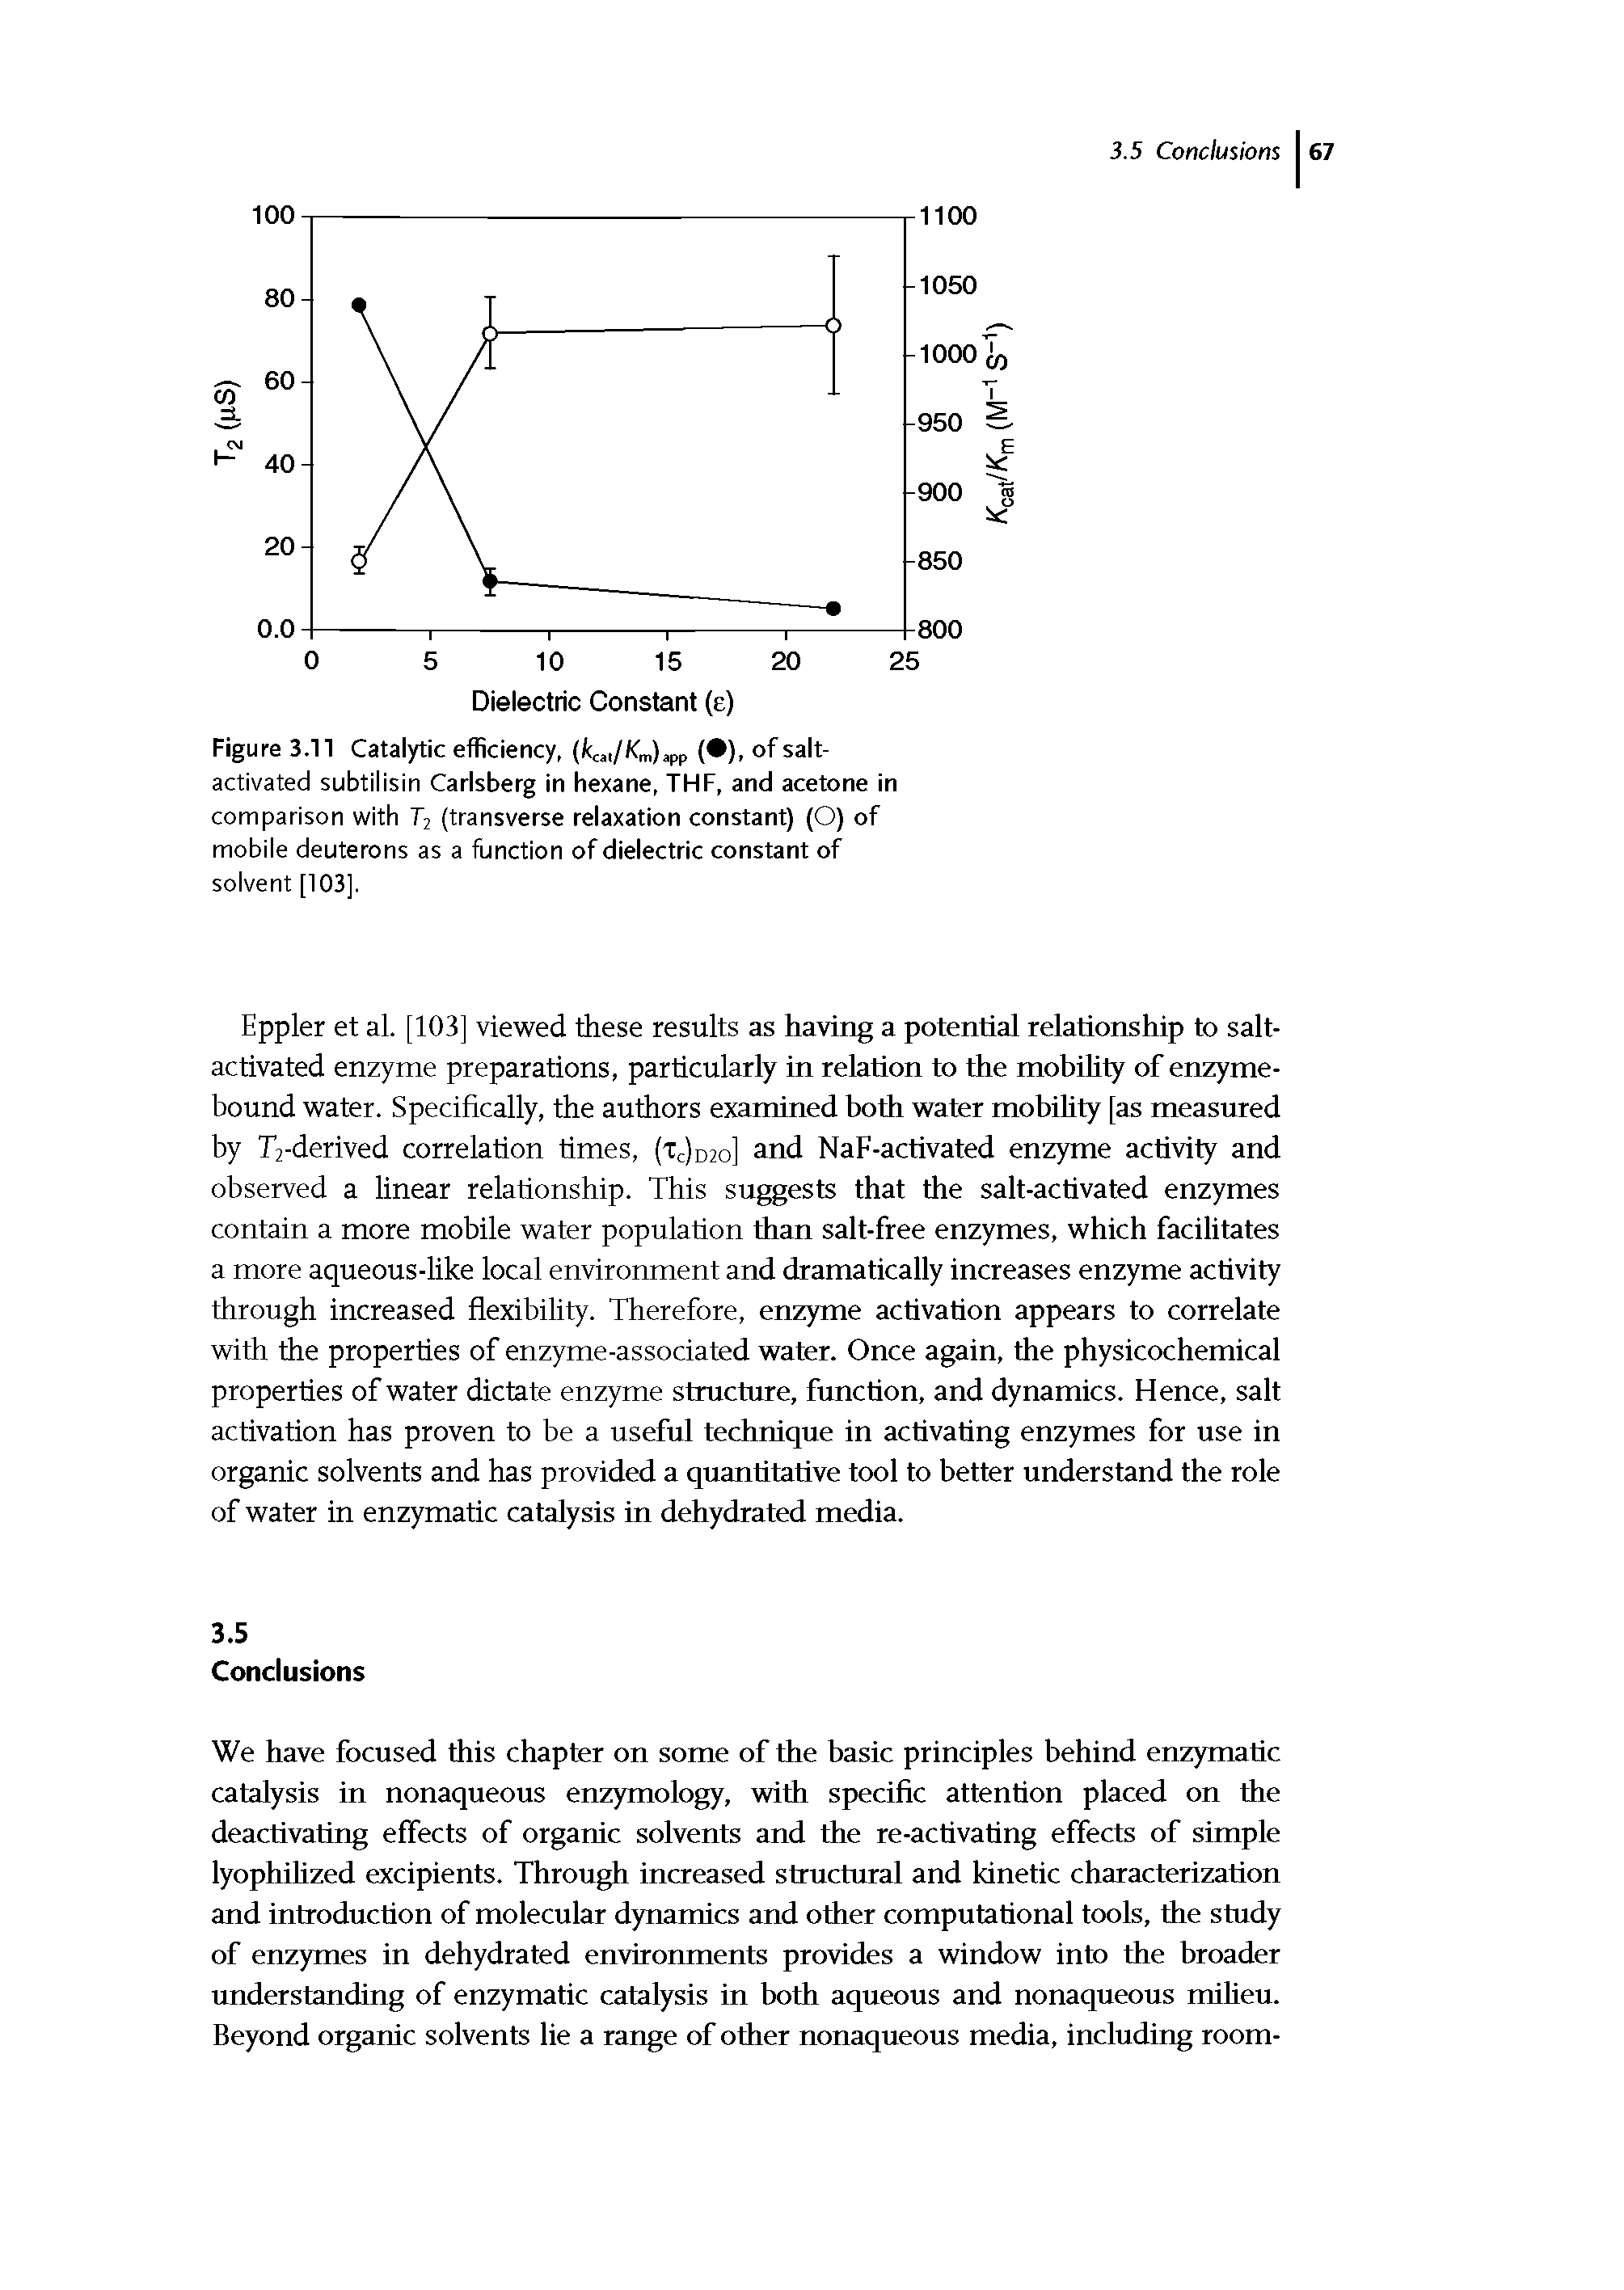 Figure 3.11 Catalytic efficiency, (fcca,/K ,)app ( ), of salt-activated subtilisin Carlsberg in hexane, THF, and acetone in comparison with T2 (transverse relaxation constant) (O) of mobile deuterons as a function of dielectric constant of solvent [103].